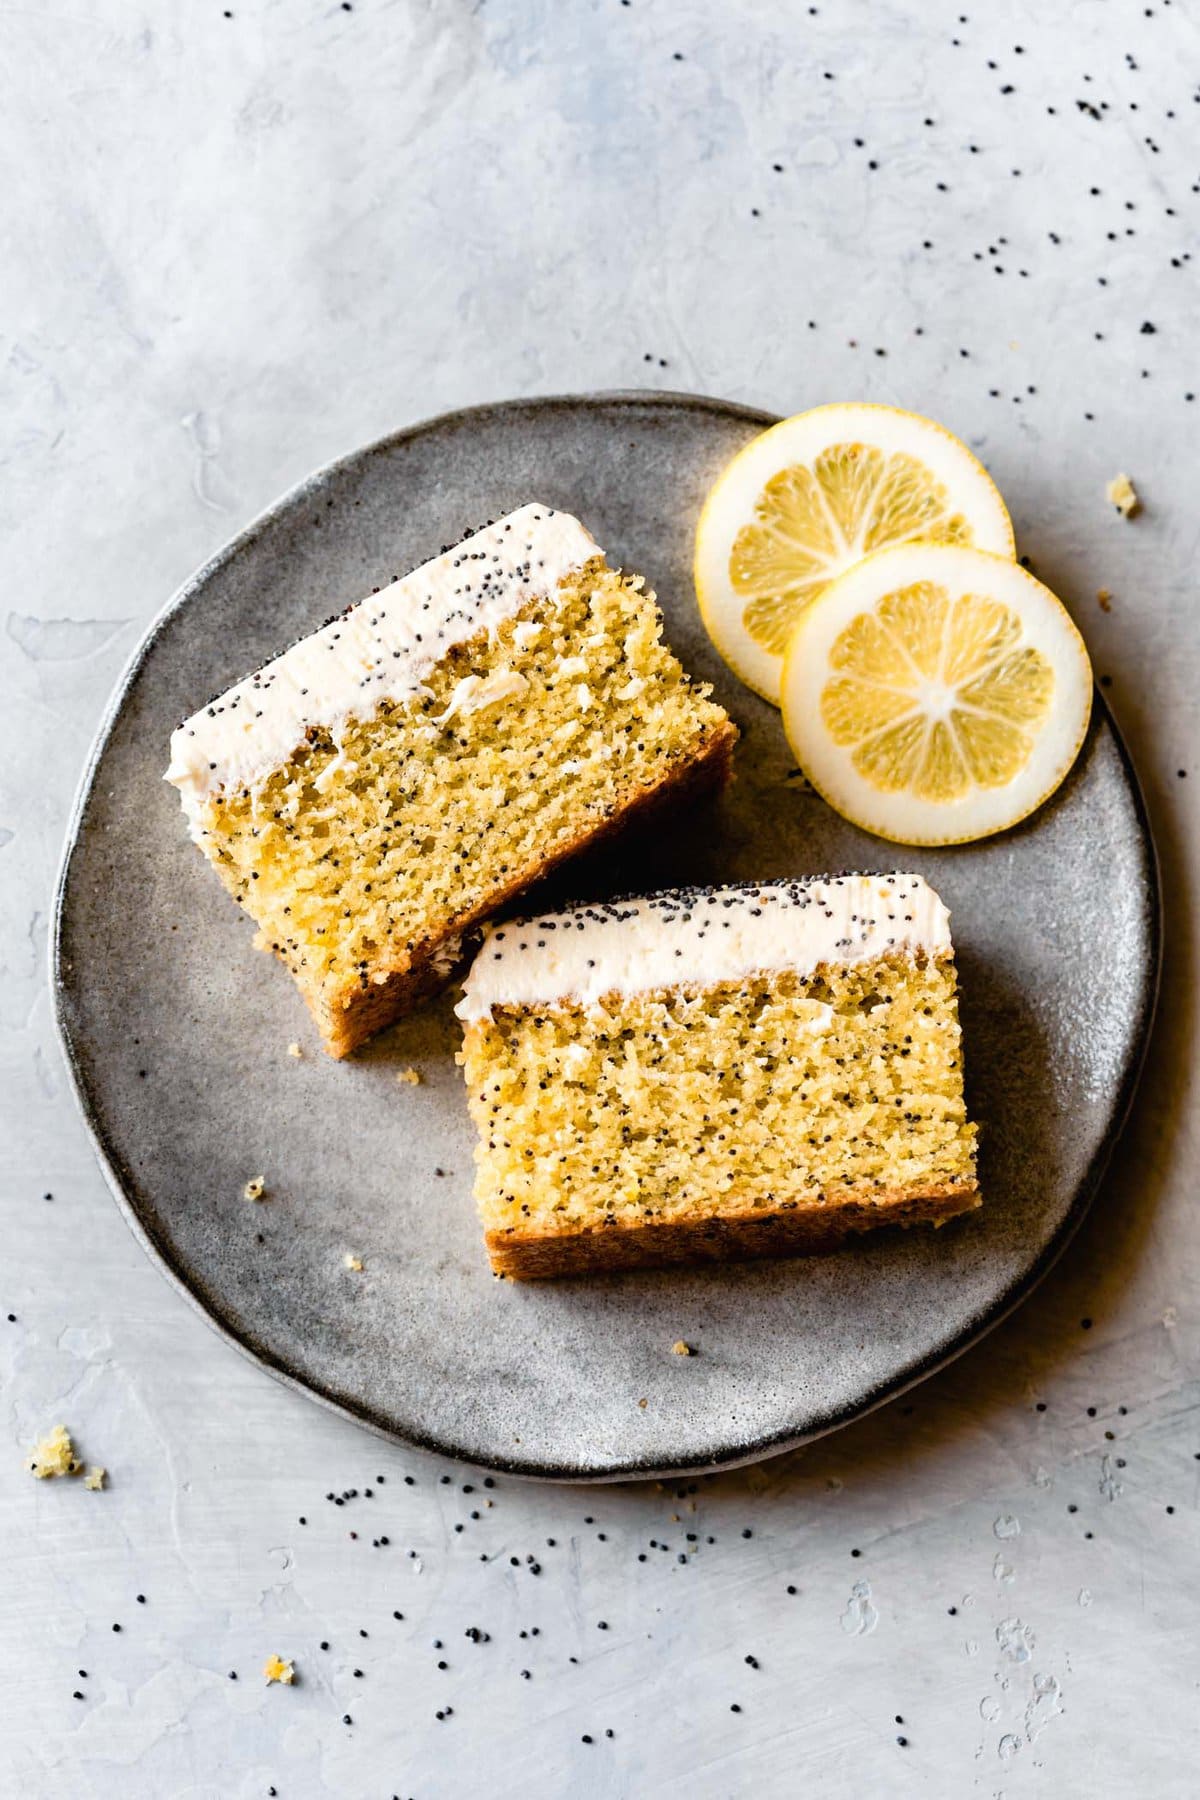 two slices of lemon cake are on a gray plate on their side showing off their sexy layers of cake and icing